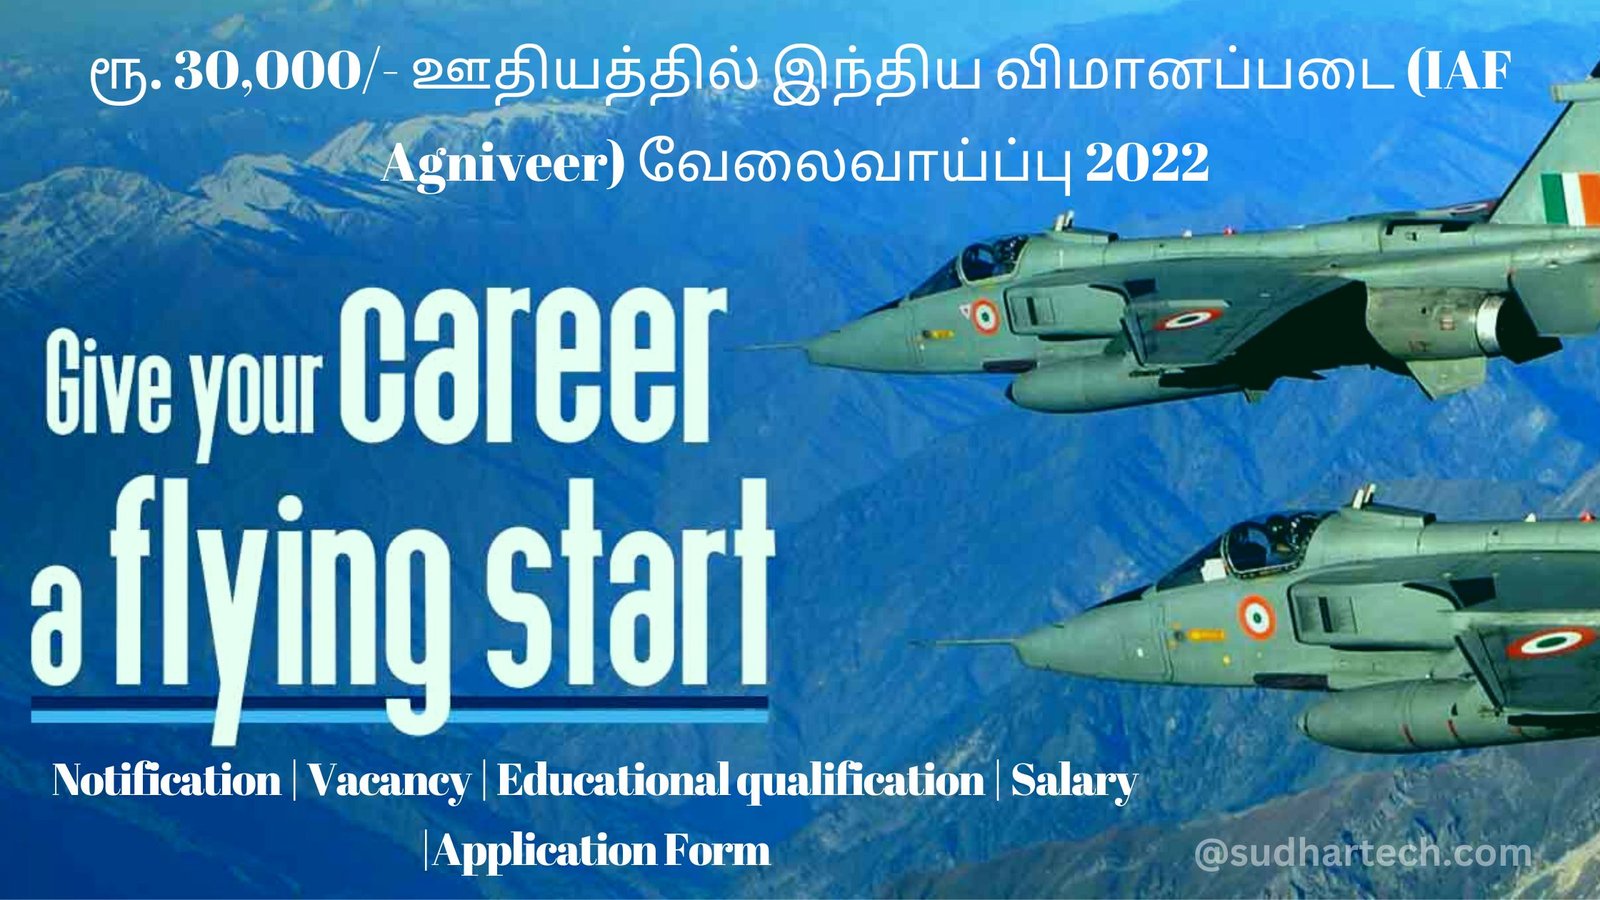 Agniveer army recruitment 2022 in Tamil